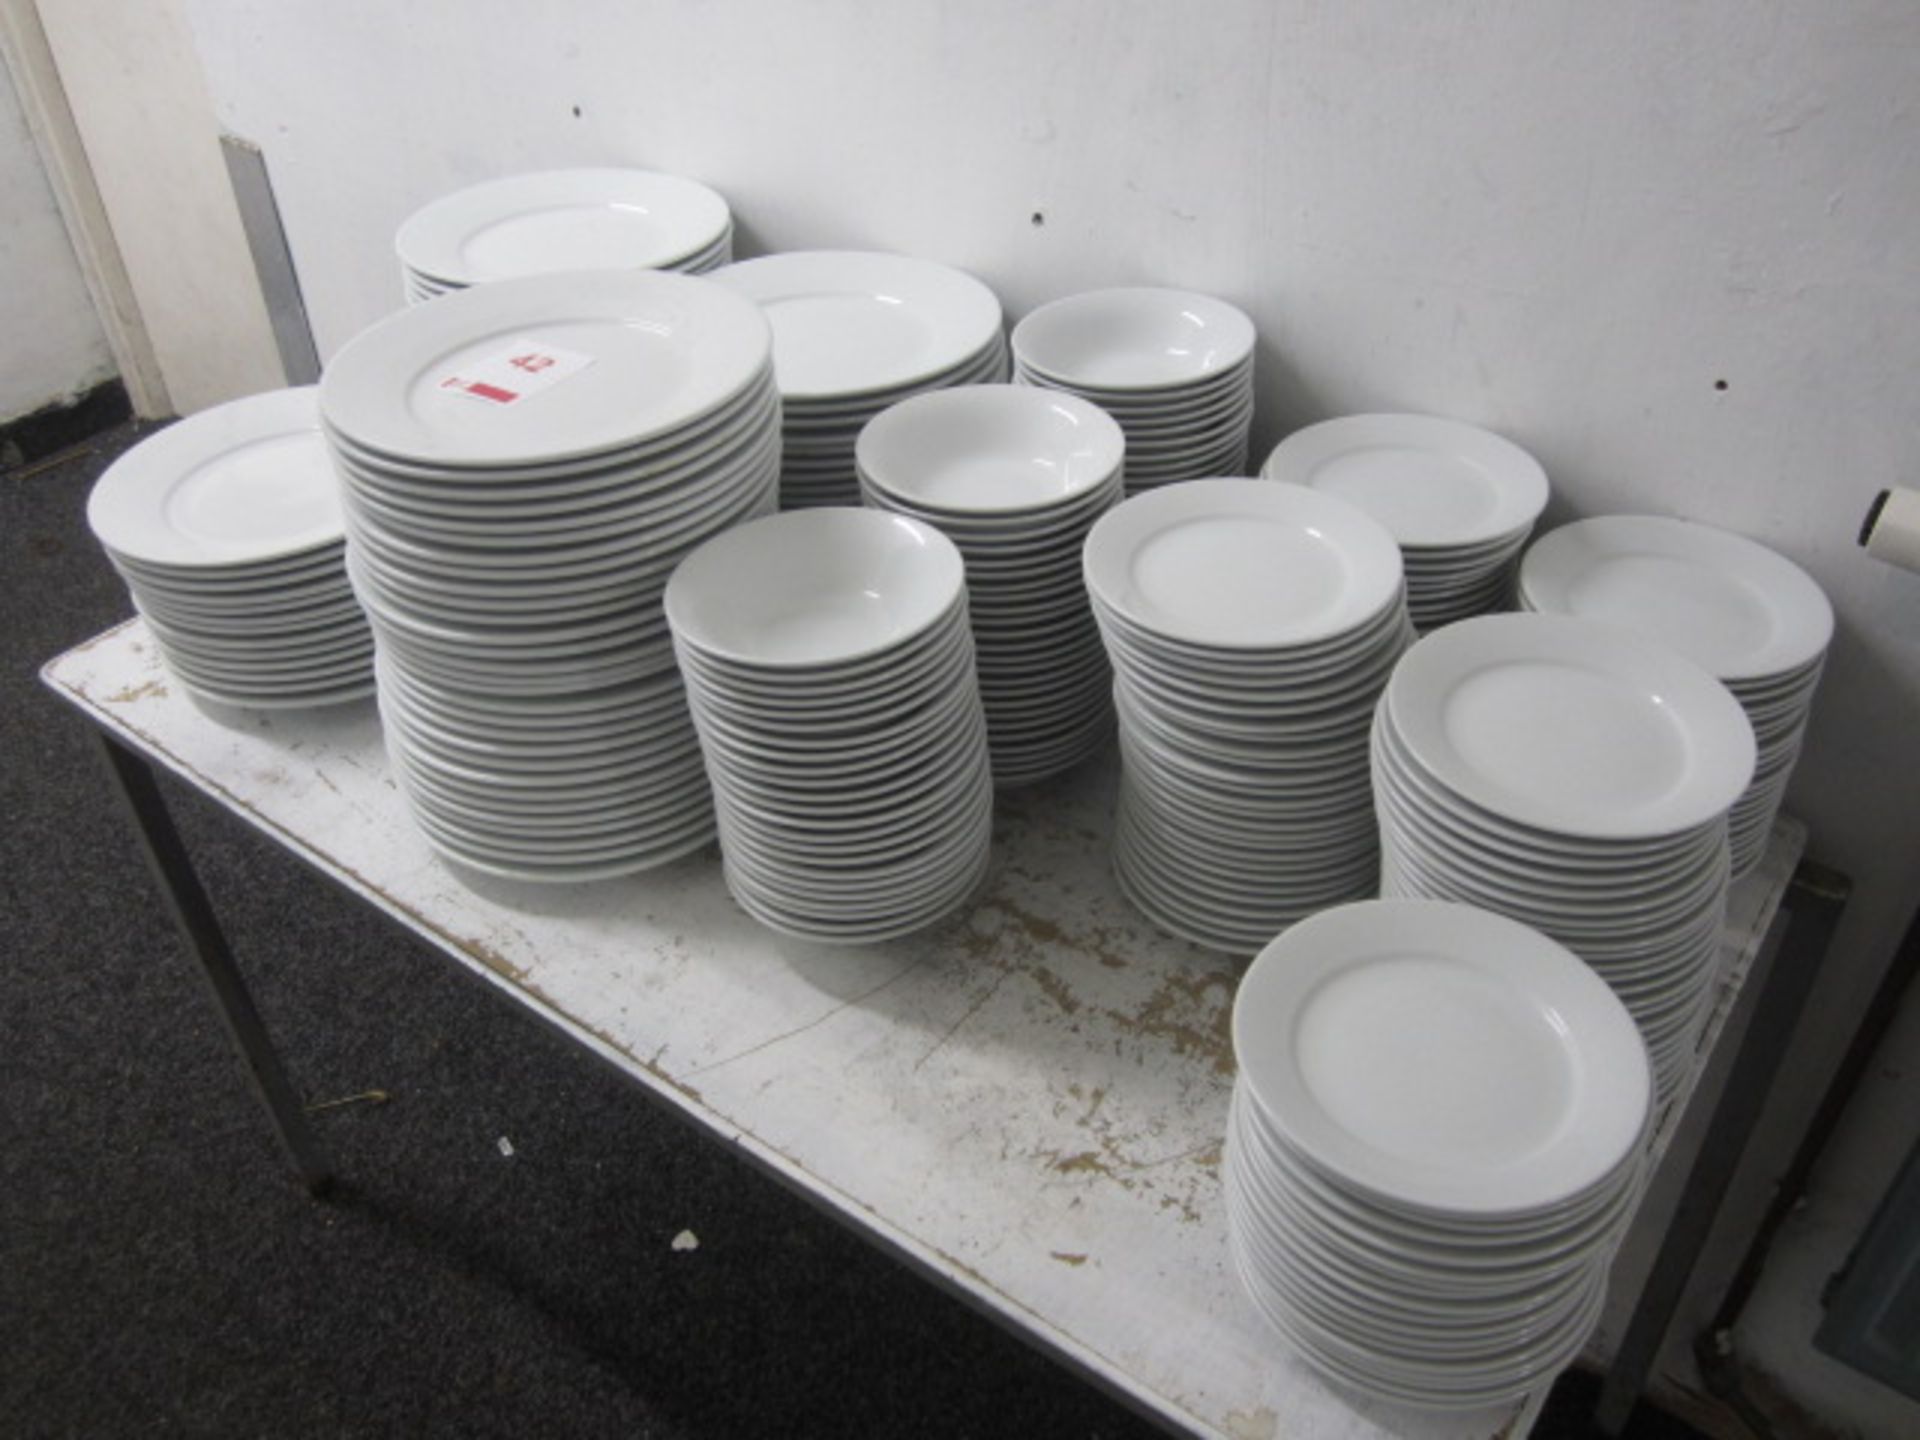 Quantity off assorted crockery plates and bowls